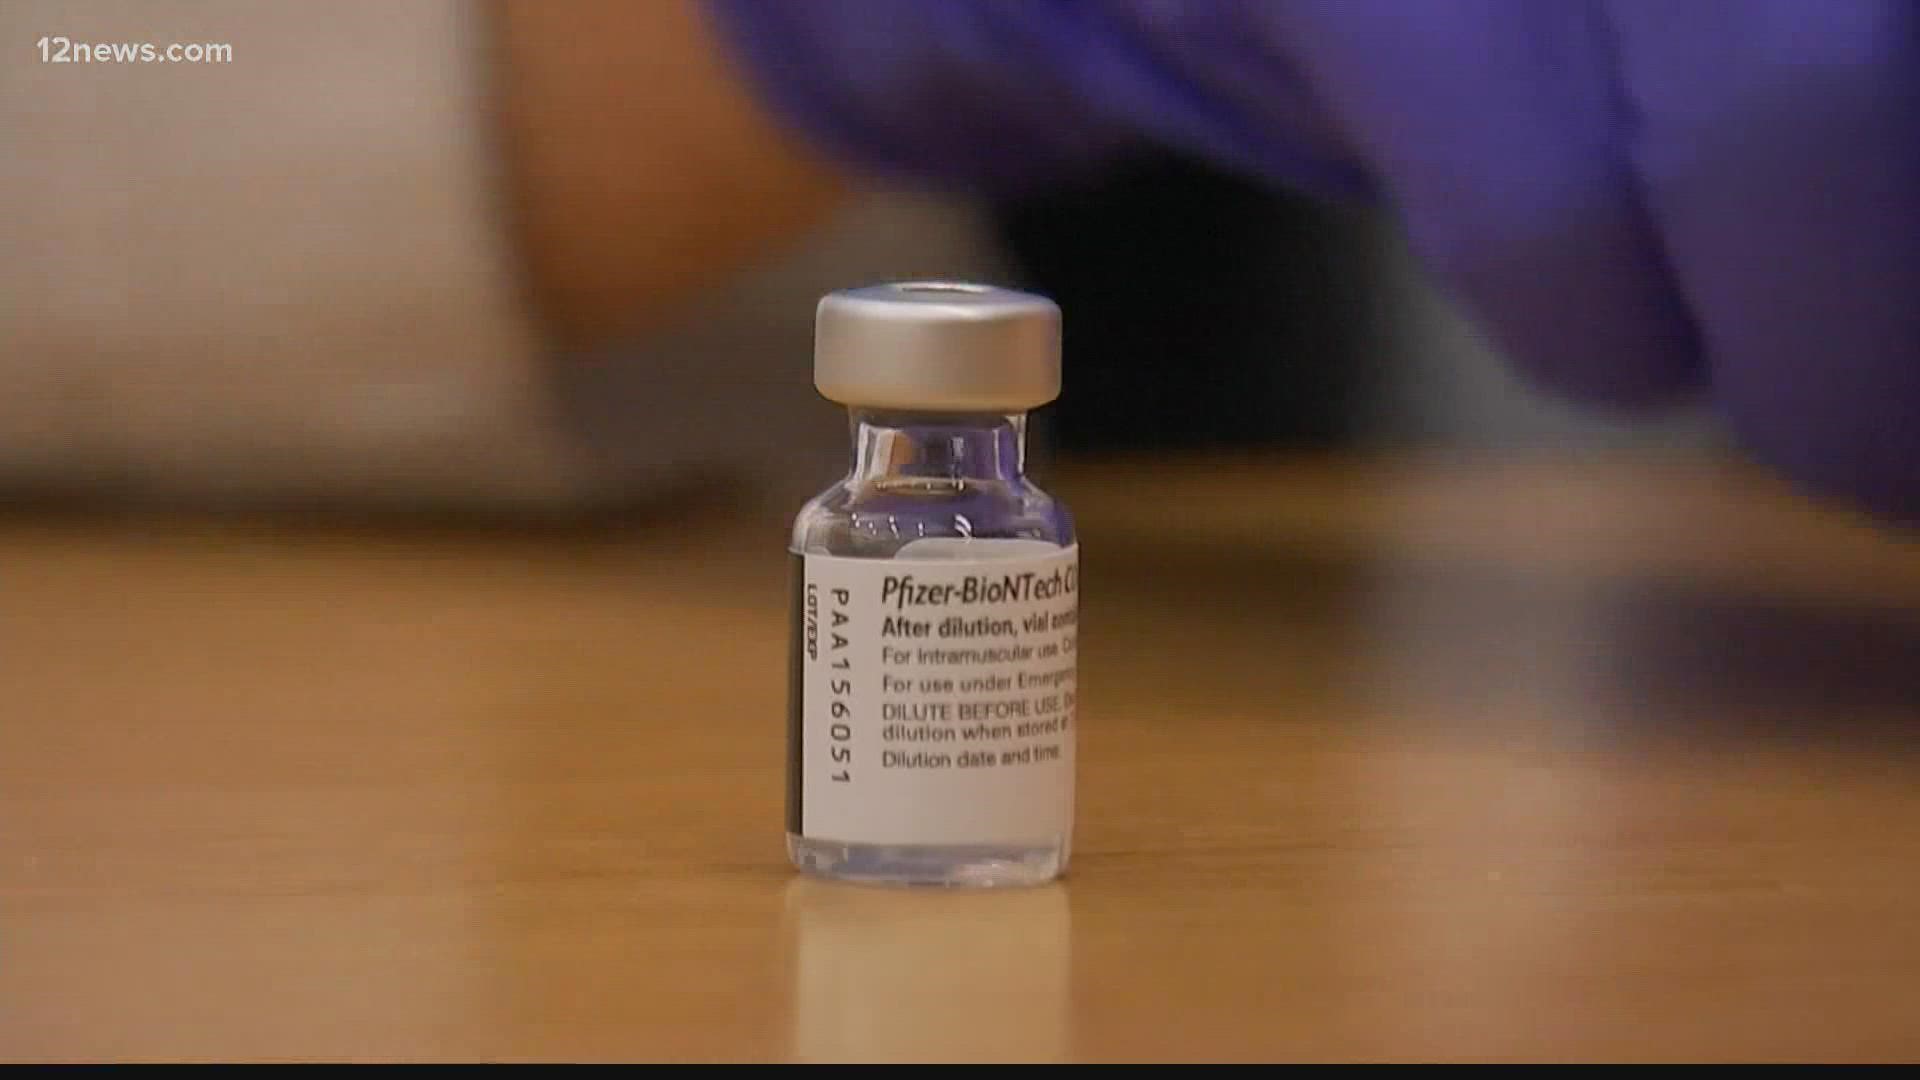 Right now, the number of people getting booster shots is outpacing those getting their first or second doses of the initial vaccination, according to NBC News.